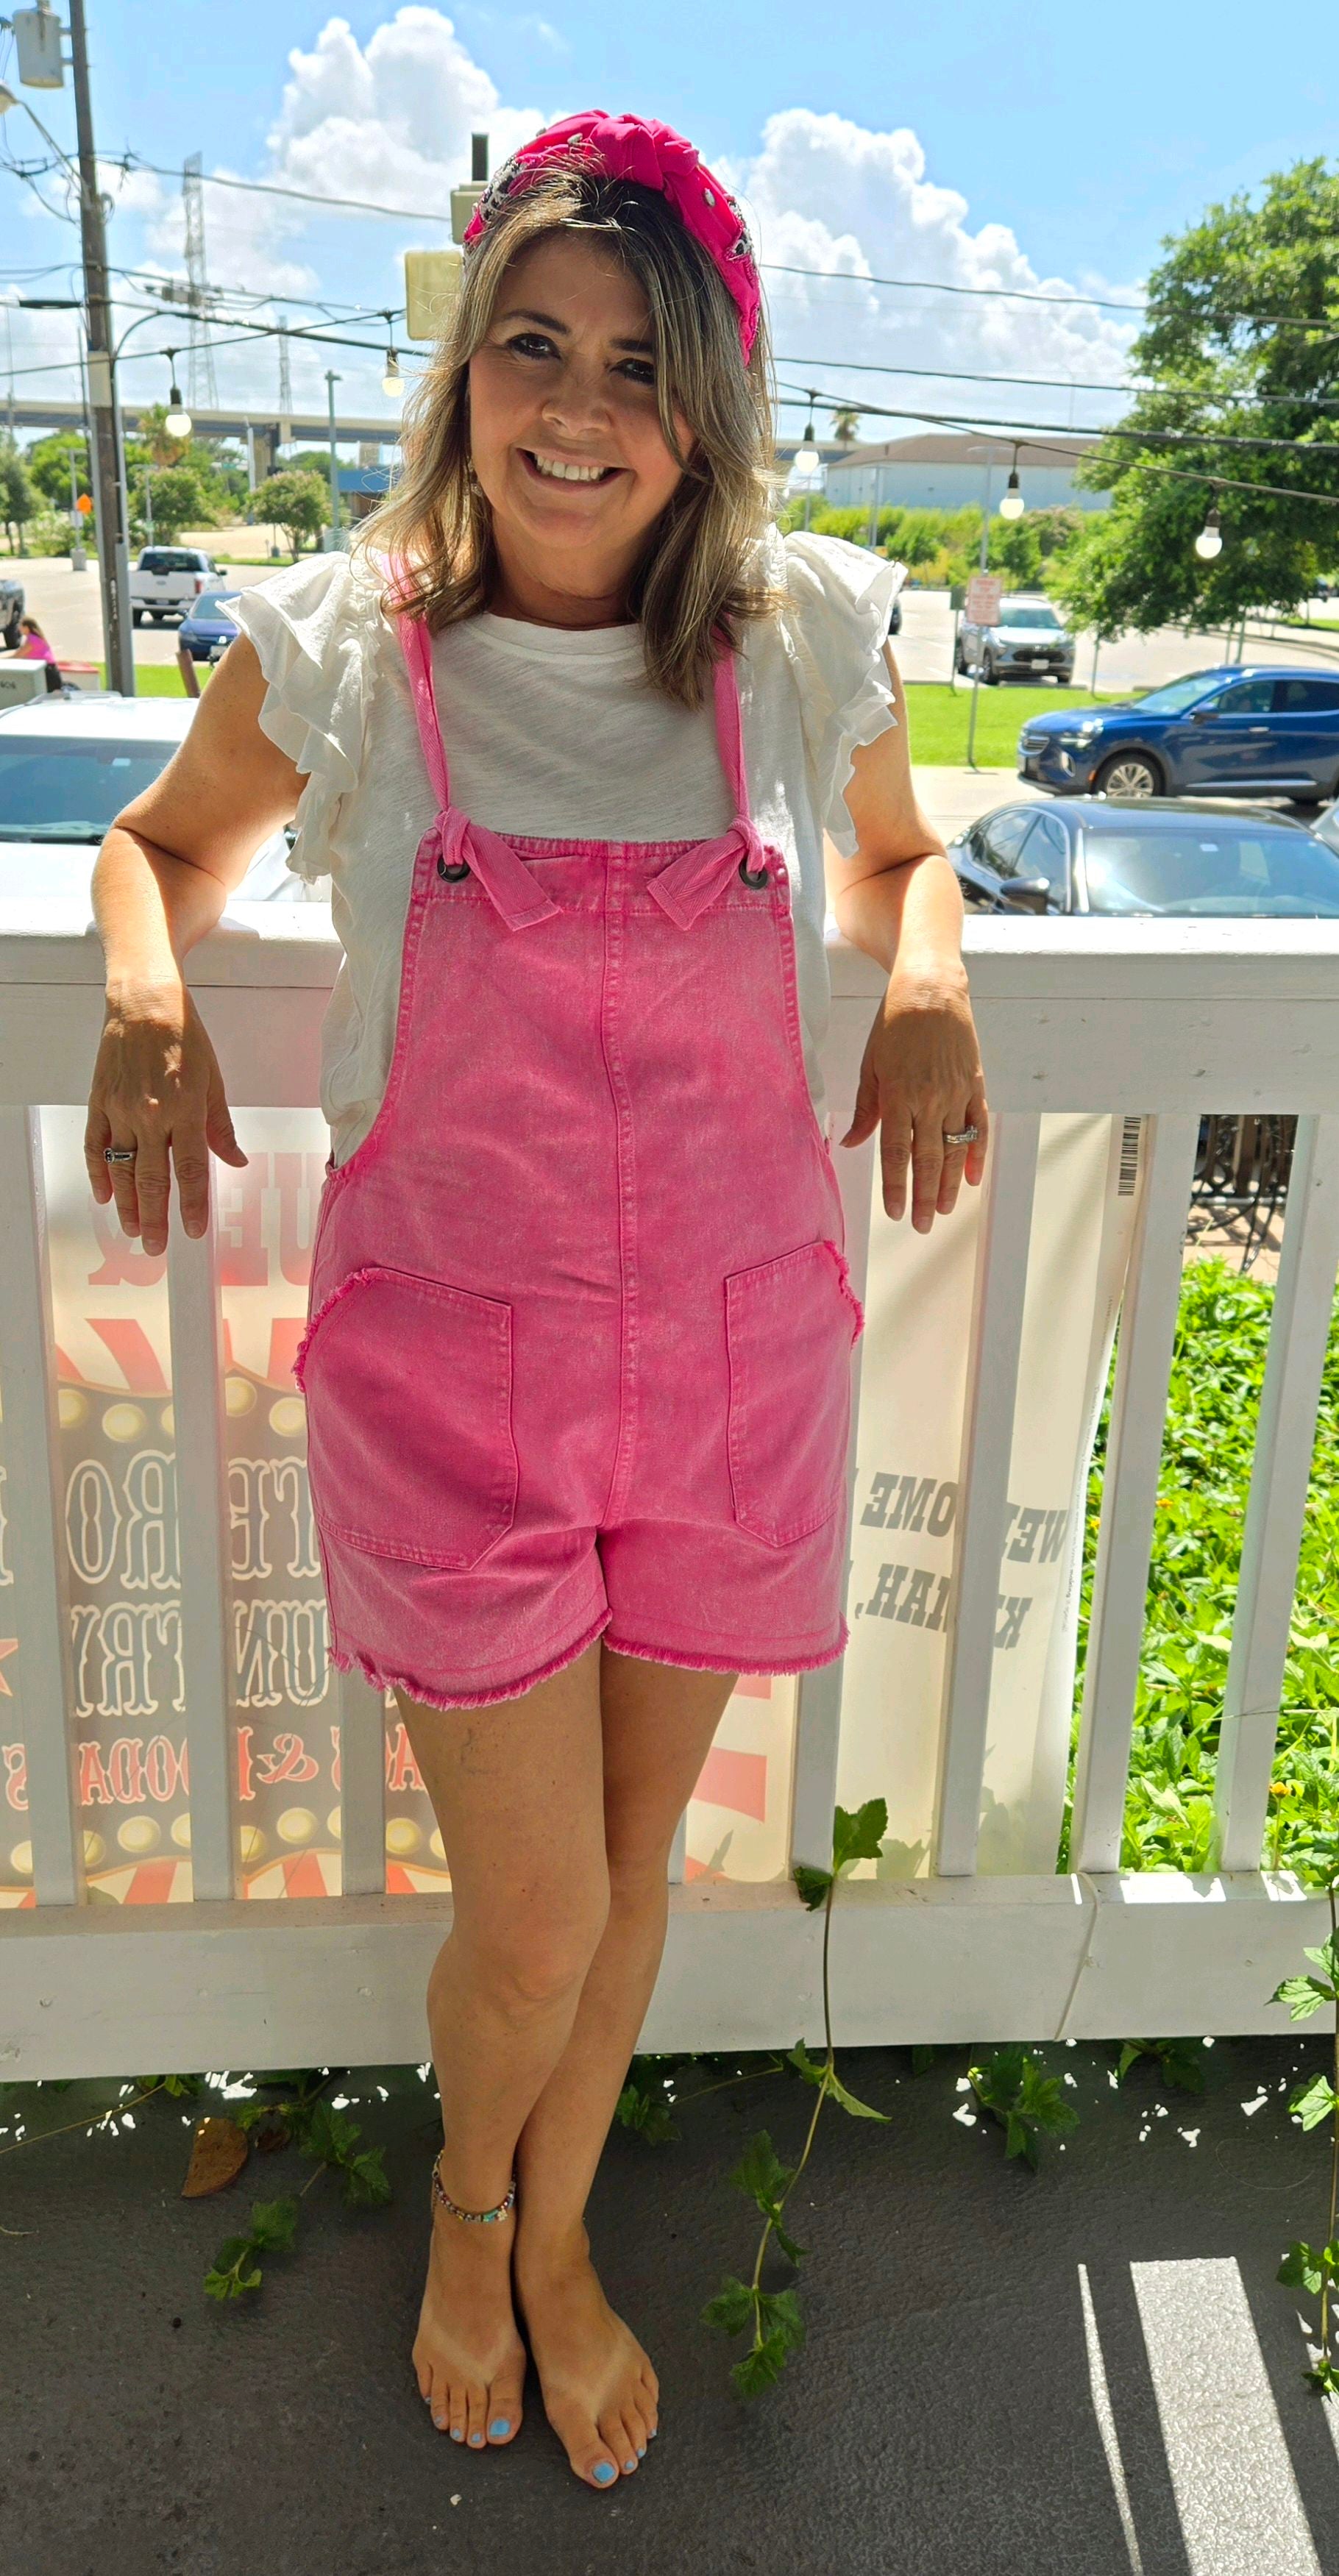 PEGGY MARTIN OVERALL SHORTS